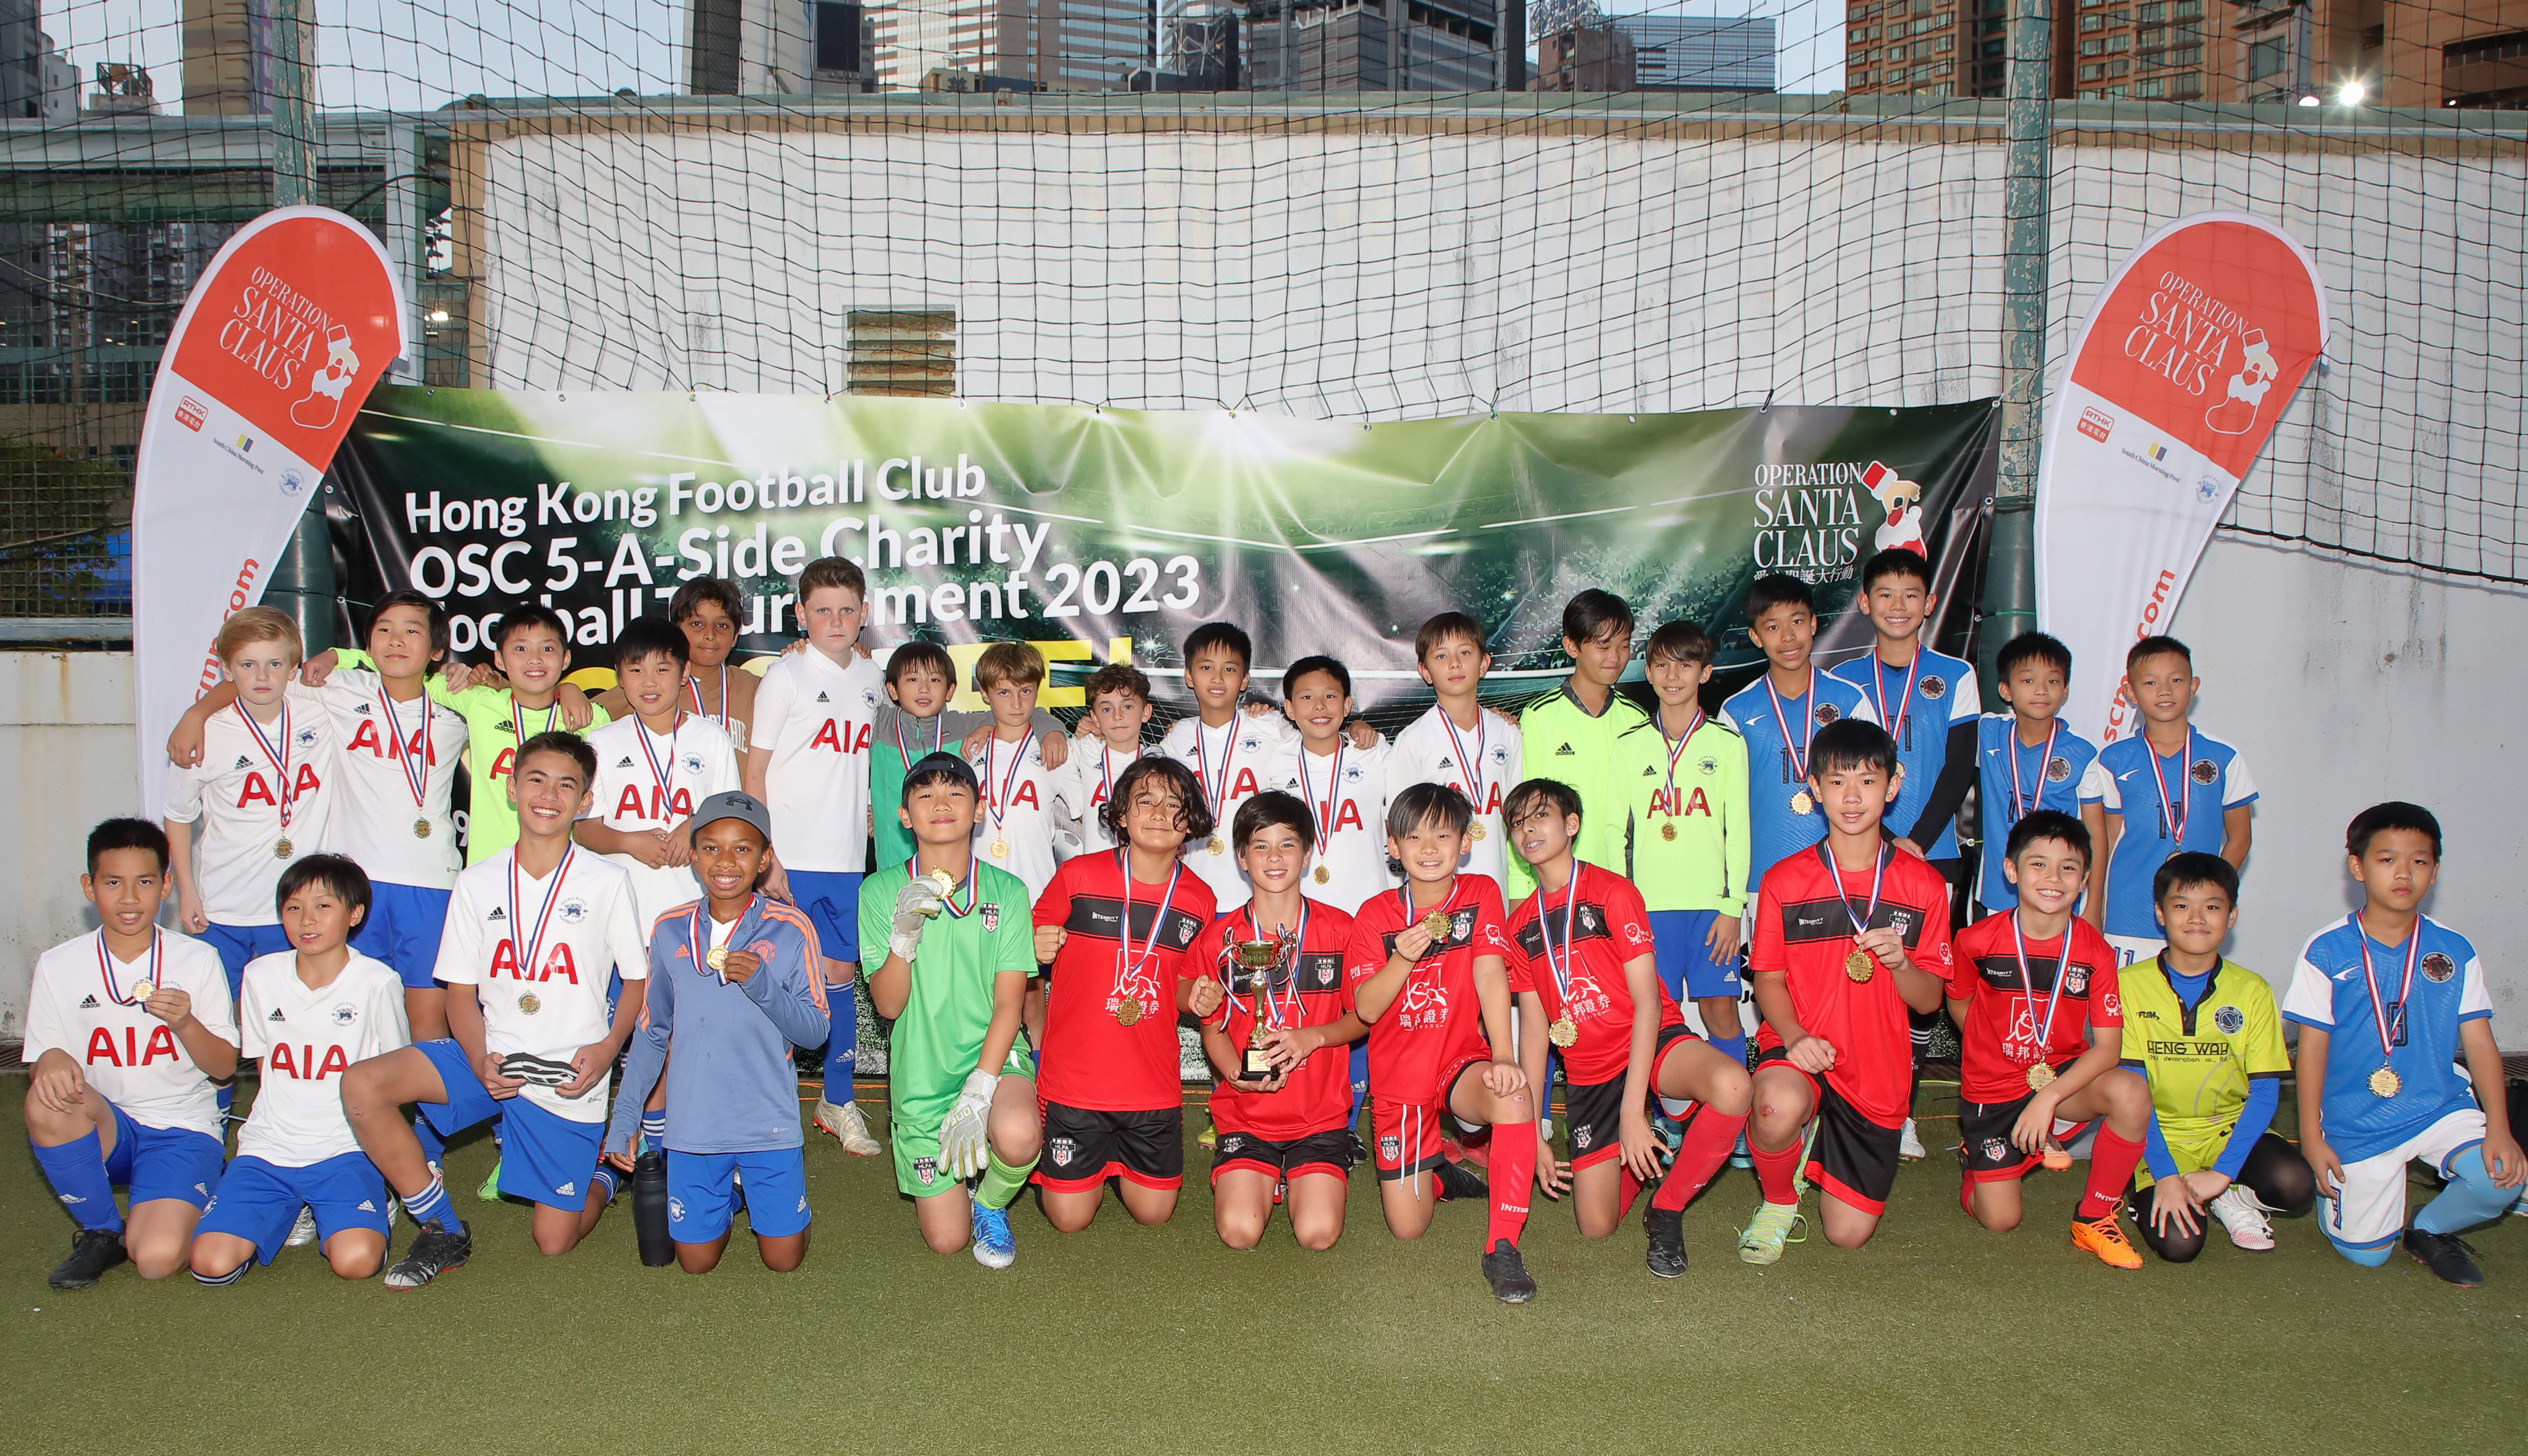 Three teams comprising 17 players aged 10 or below also  took part in the tournament. Photo:  Bharat Khemlani